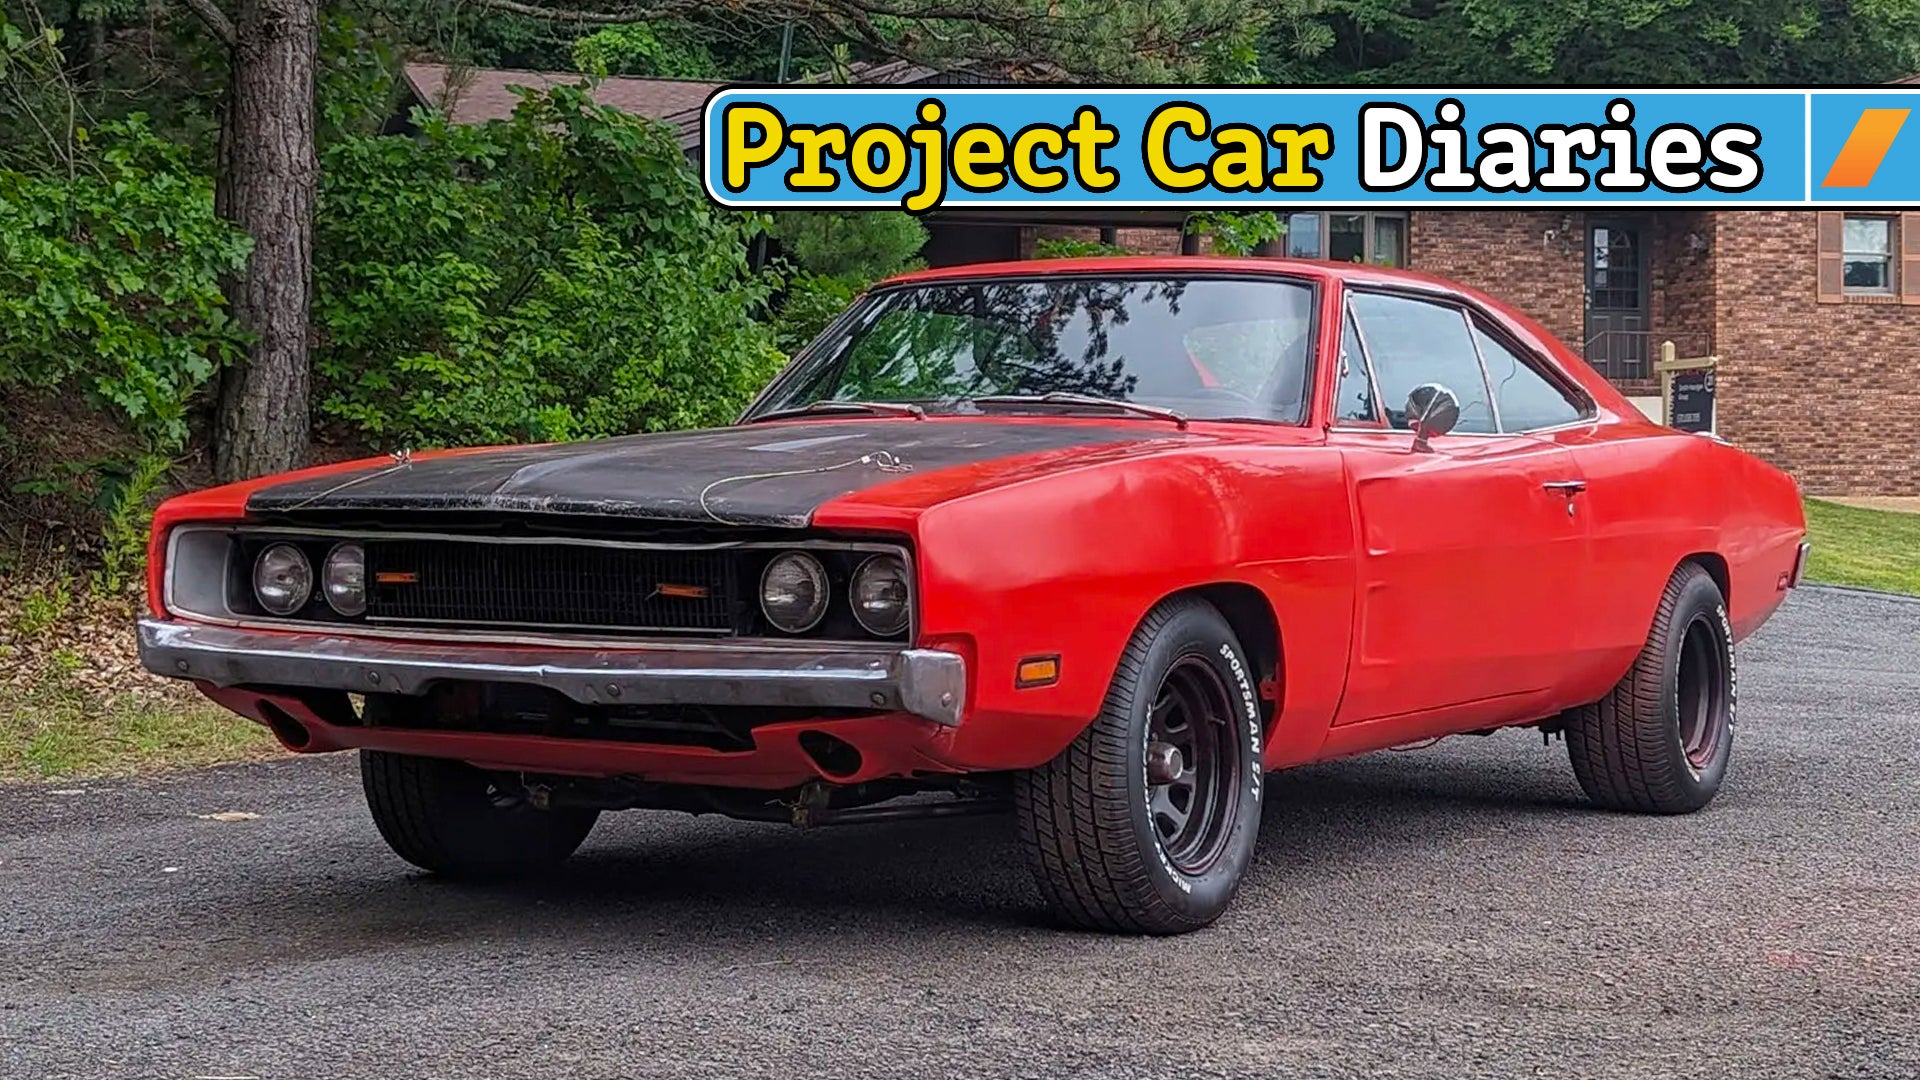 What is a Project Car?